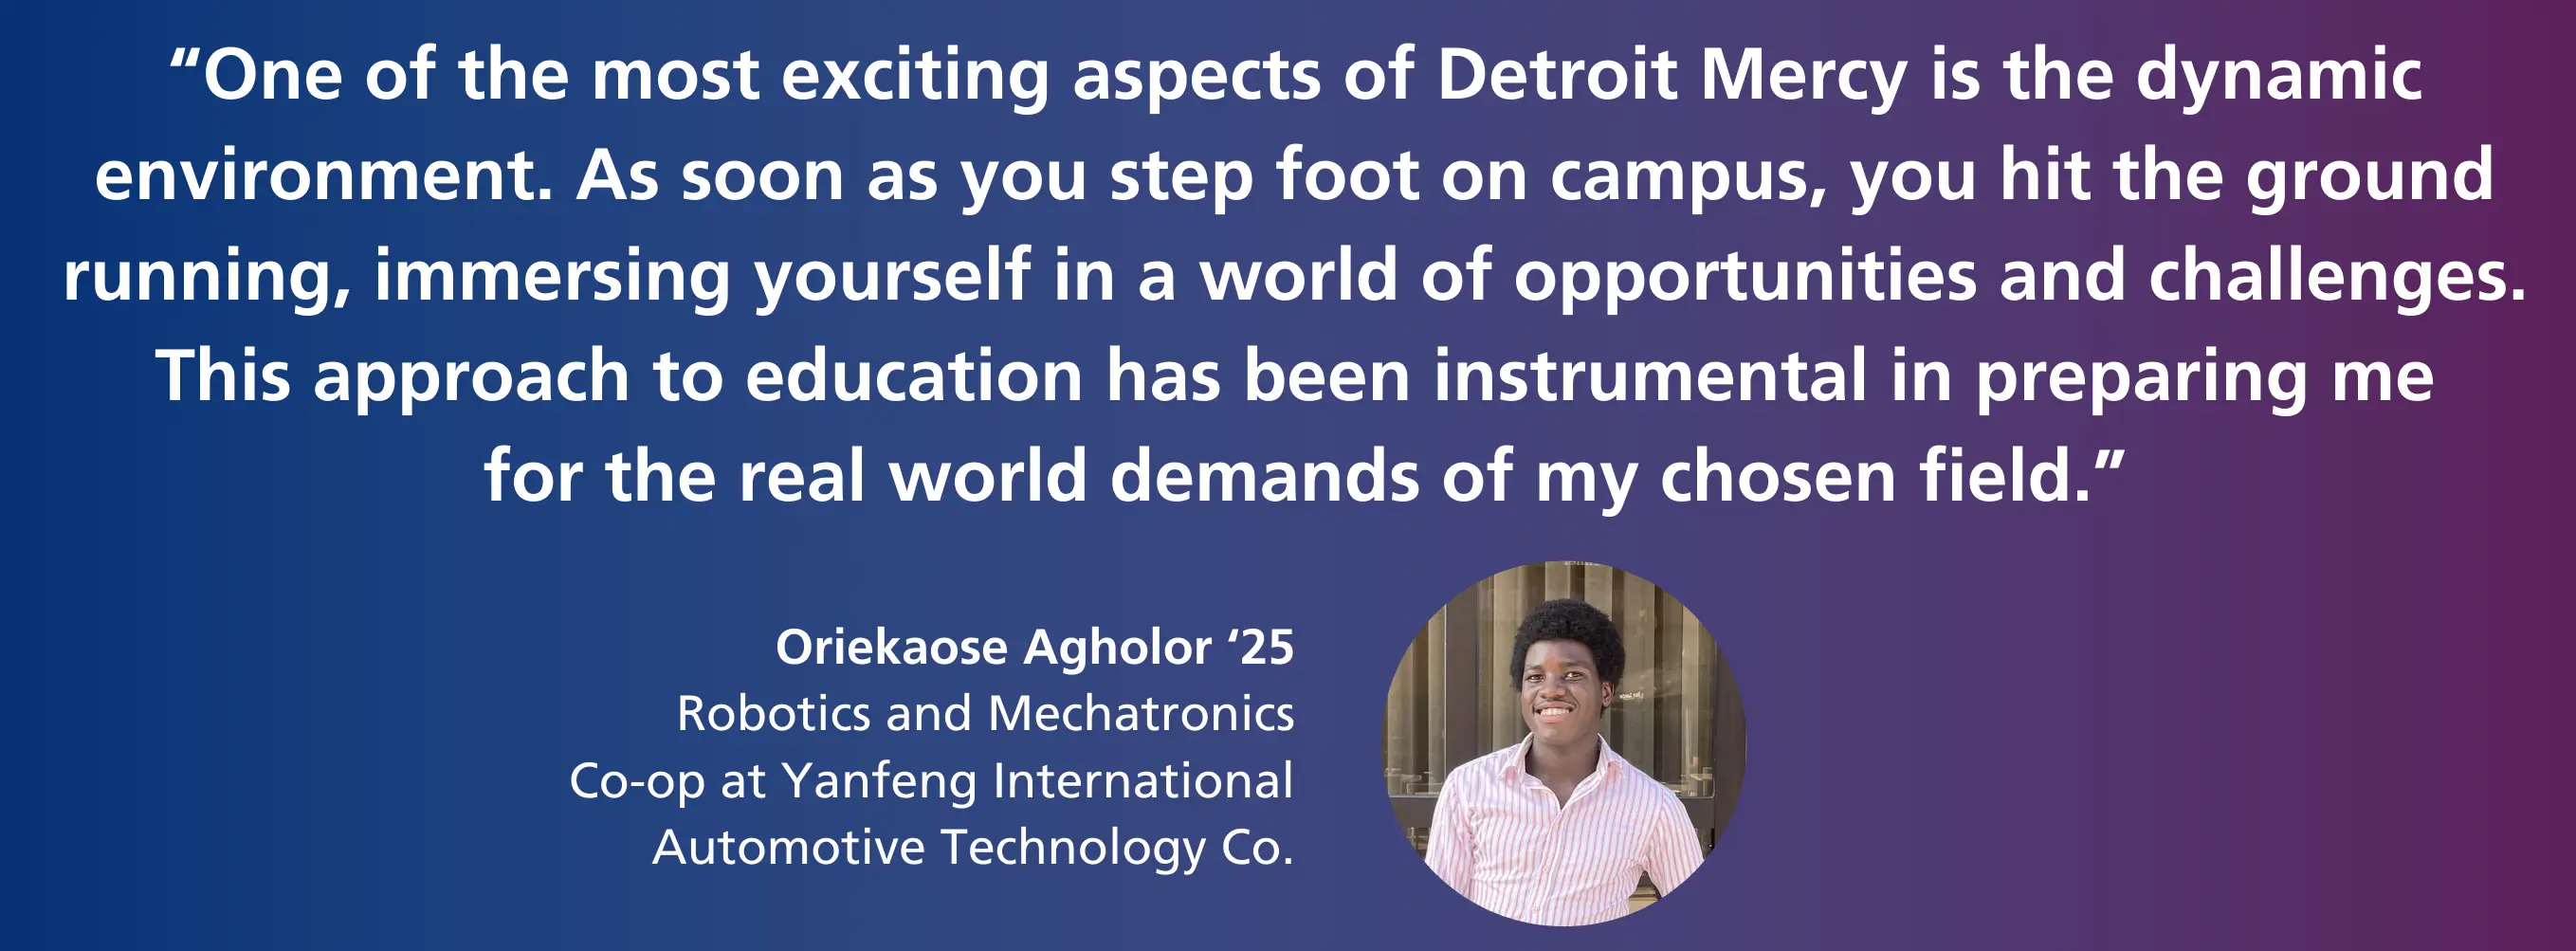 "One of the most exciting aspects of Detroit Mercy is the dynamic environment. As soon as you step foot on campus, you hit the ground running, immersing yourself in a world of opportunities and challenges. This approach to education has been instrumental in preparing me for the real world demands of my chosen field." - Oriekaose Agholor '25